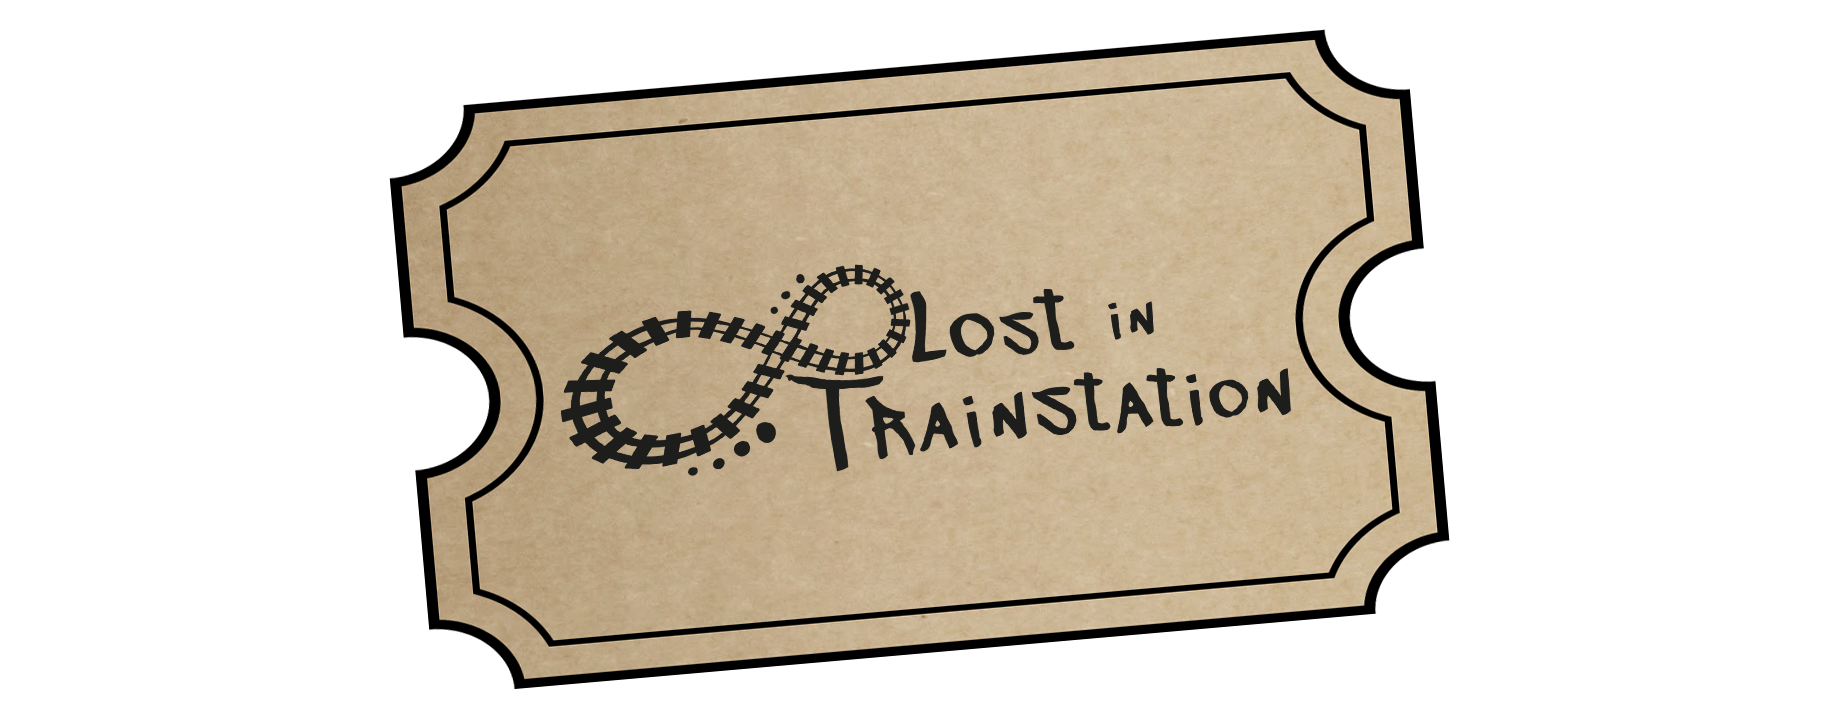 [Prototype] Lost in Trainstation